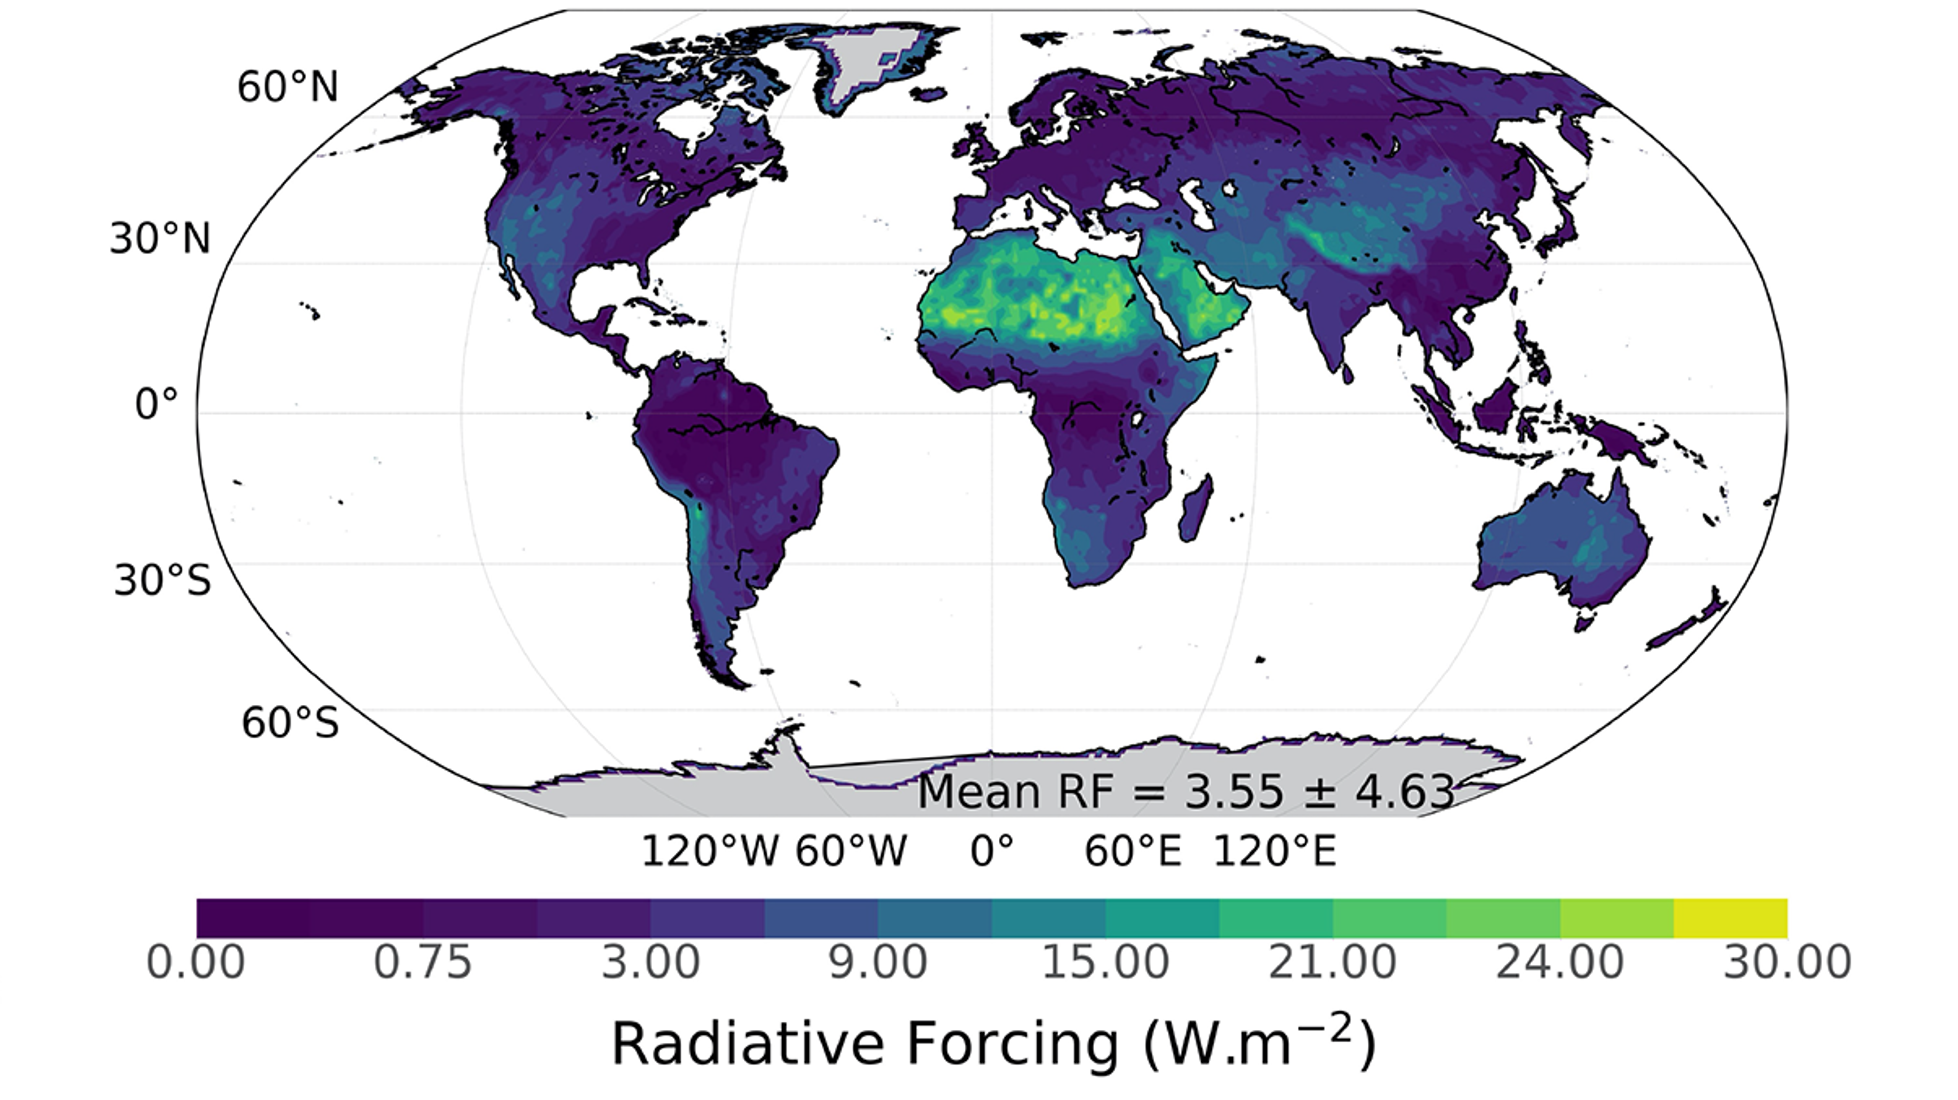 Map of the Earth displaying radiative forcing values across continents. Desert regions in northern Africa, the Arabian Peninsula, and central Asia show particularly high values.